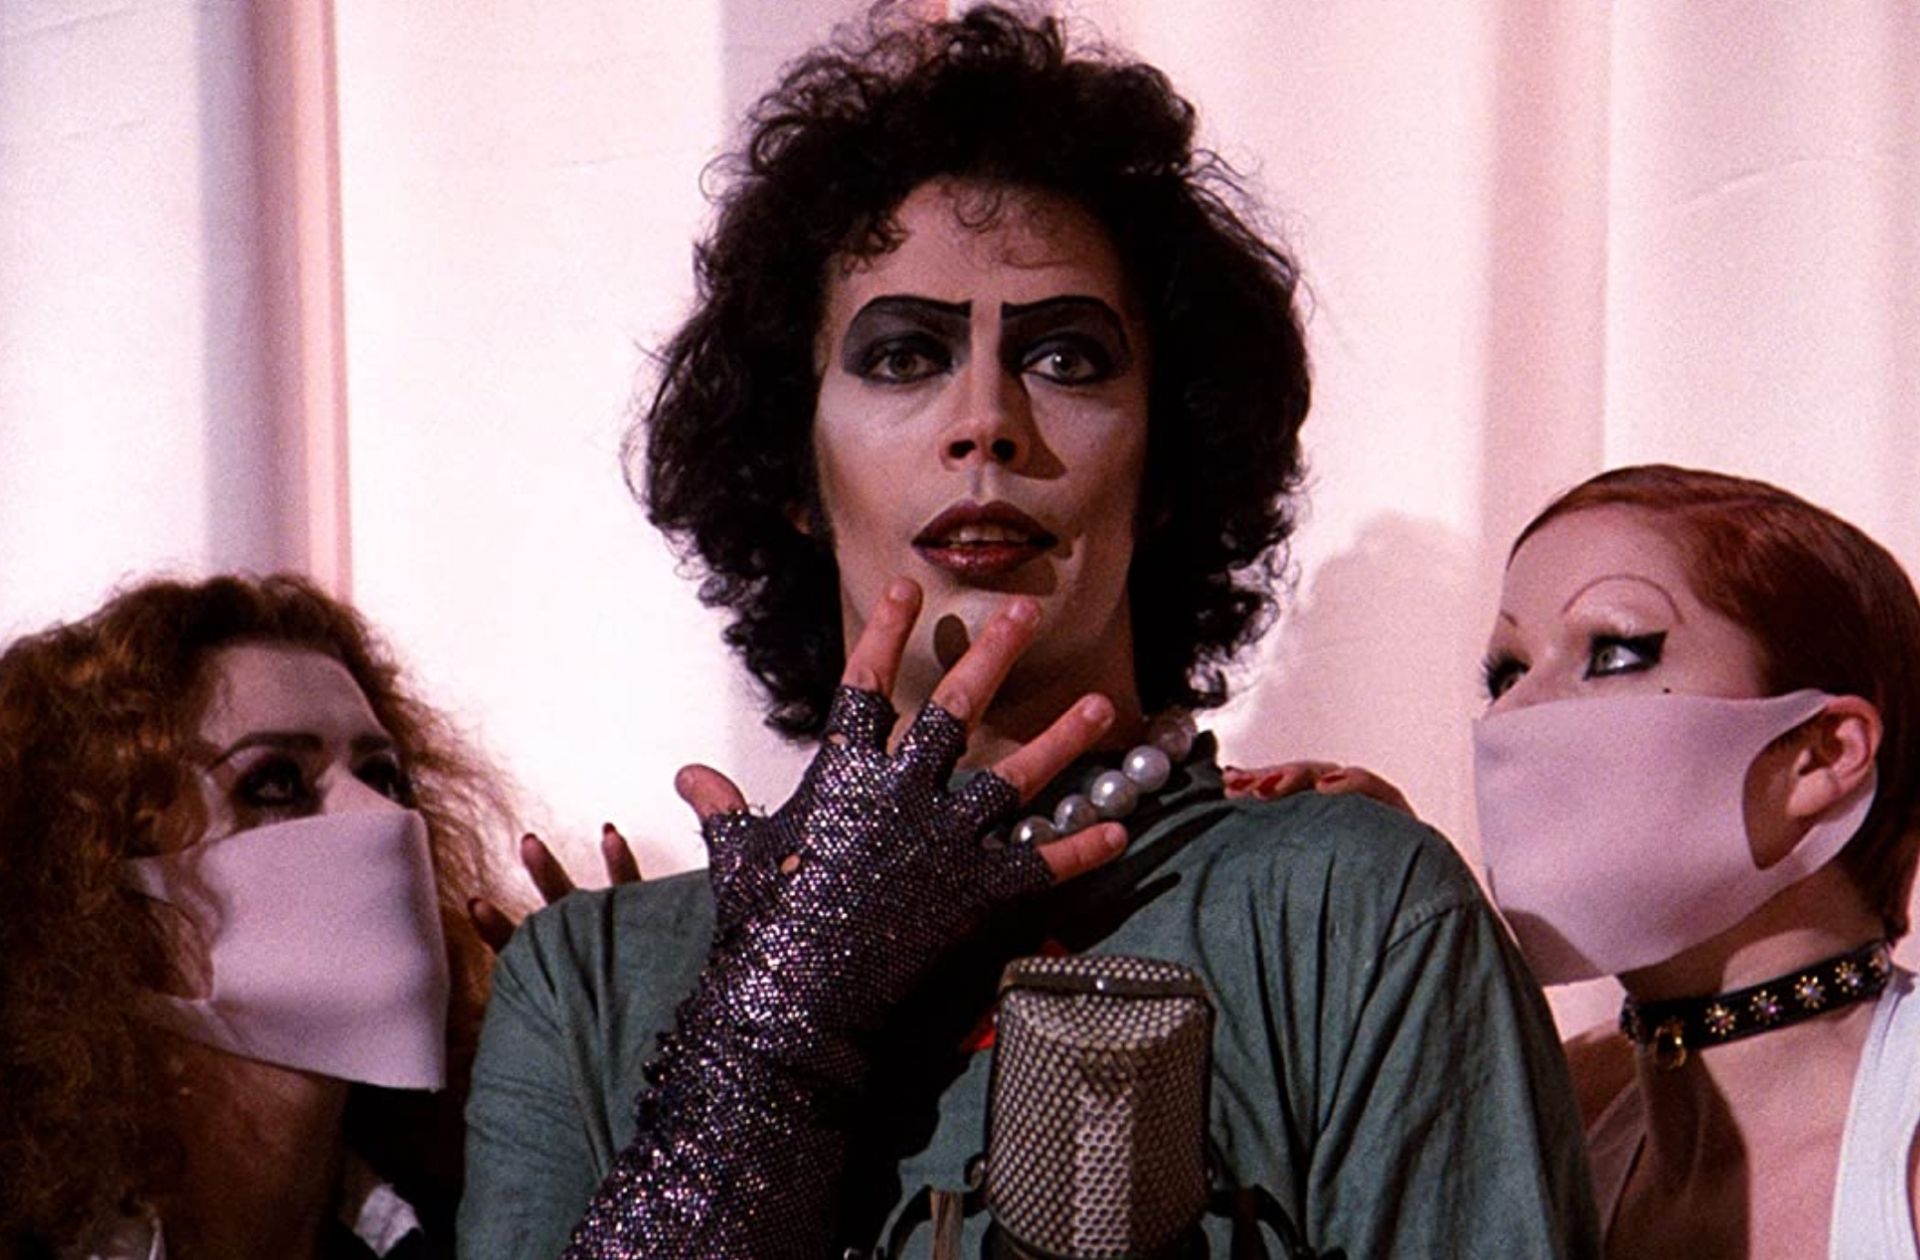 rocky horror picture show 6films halloween